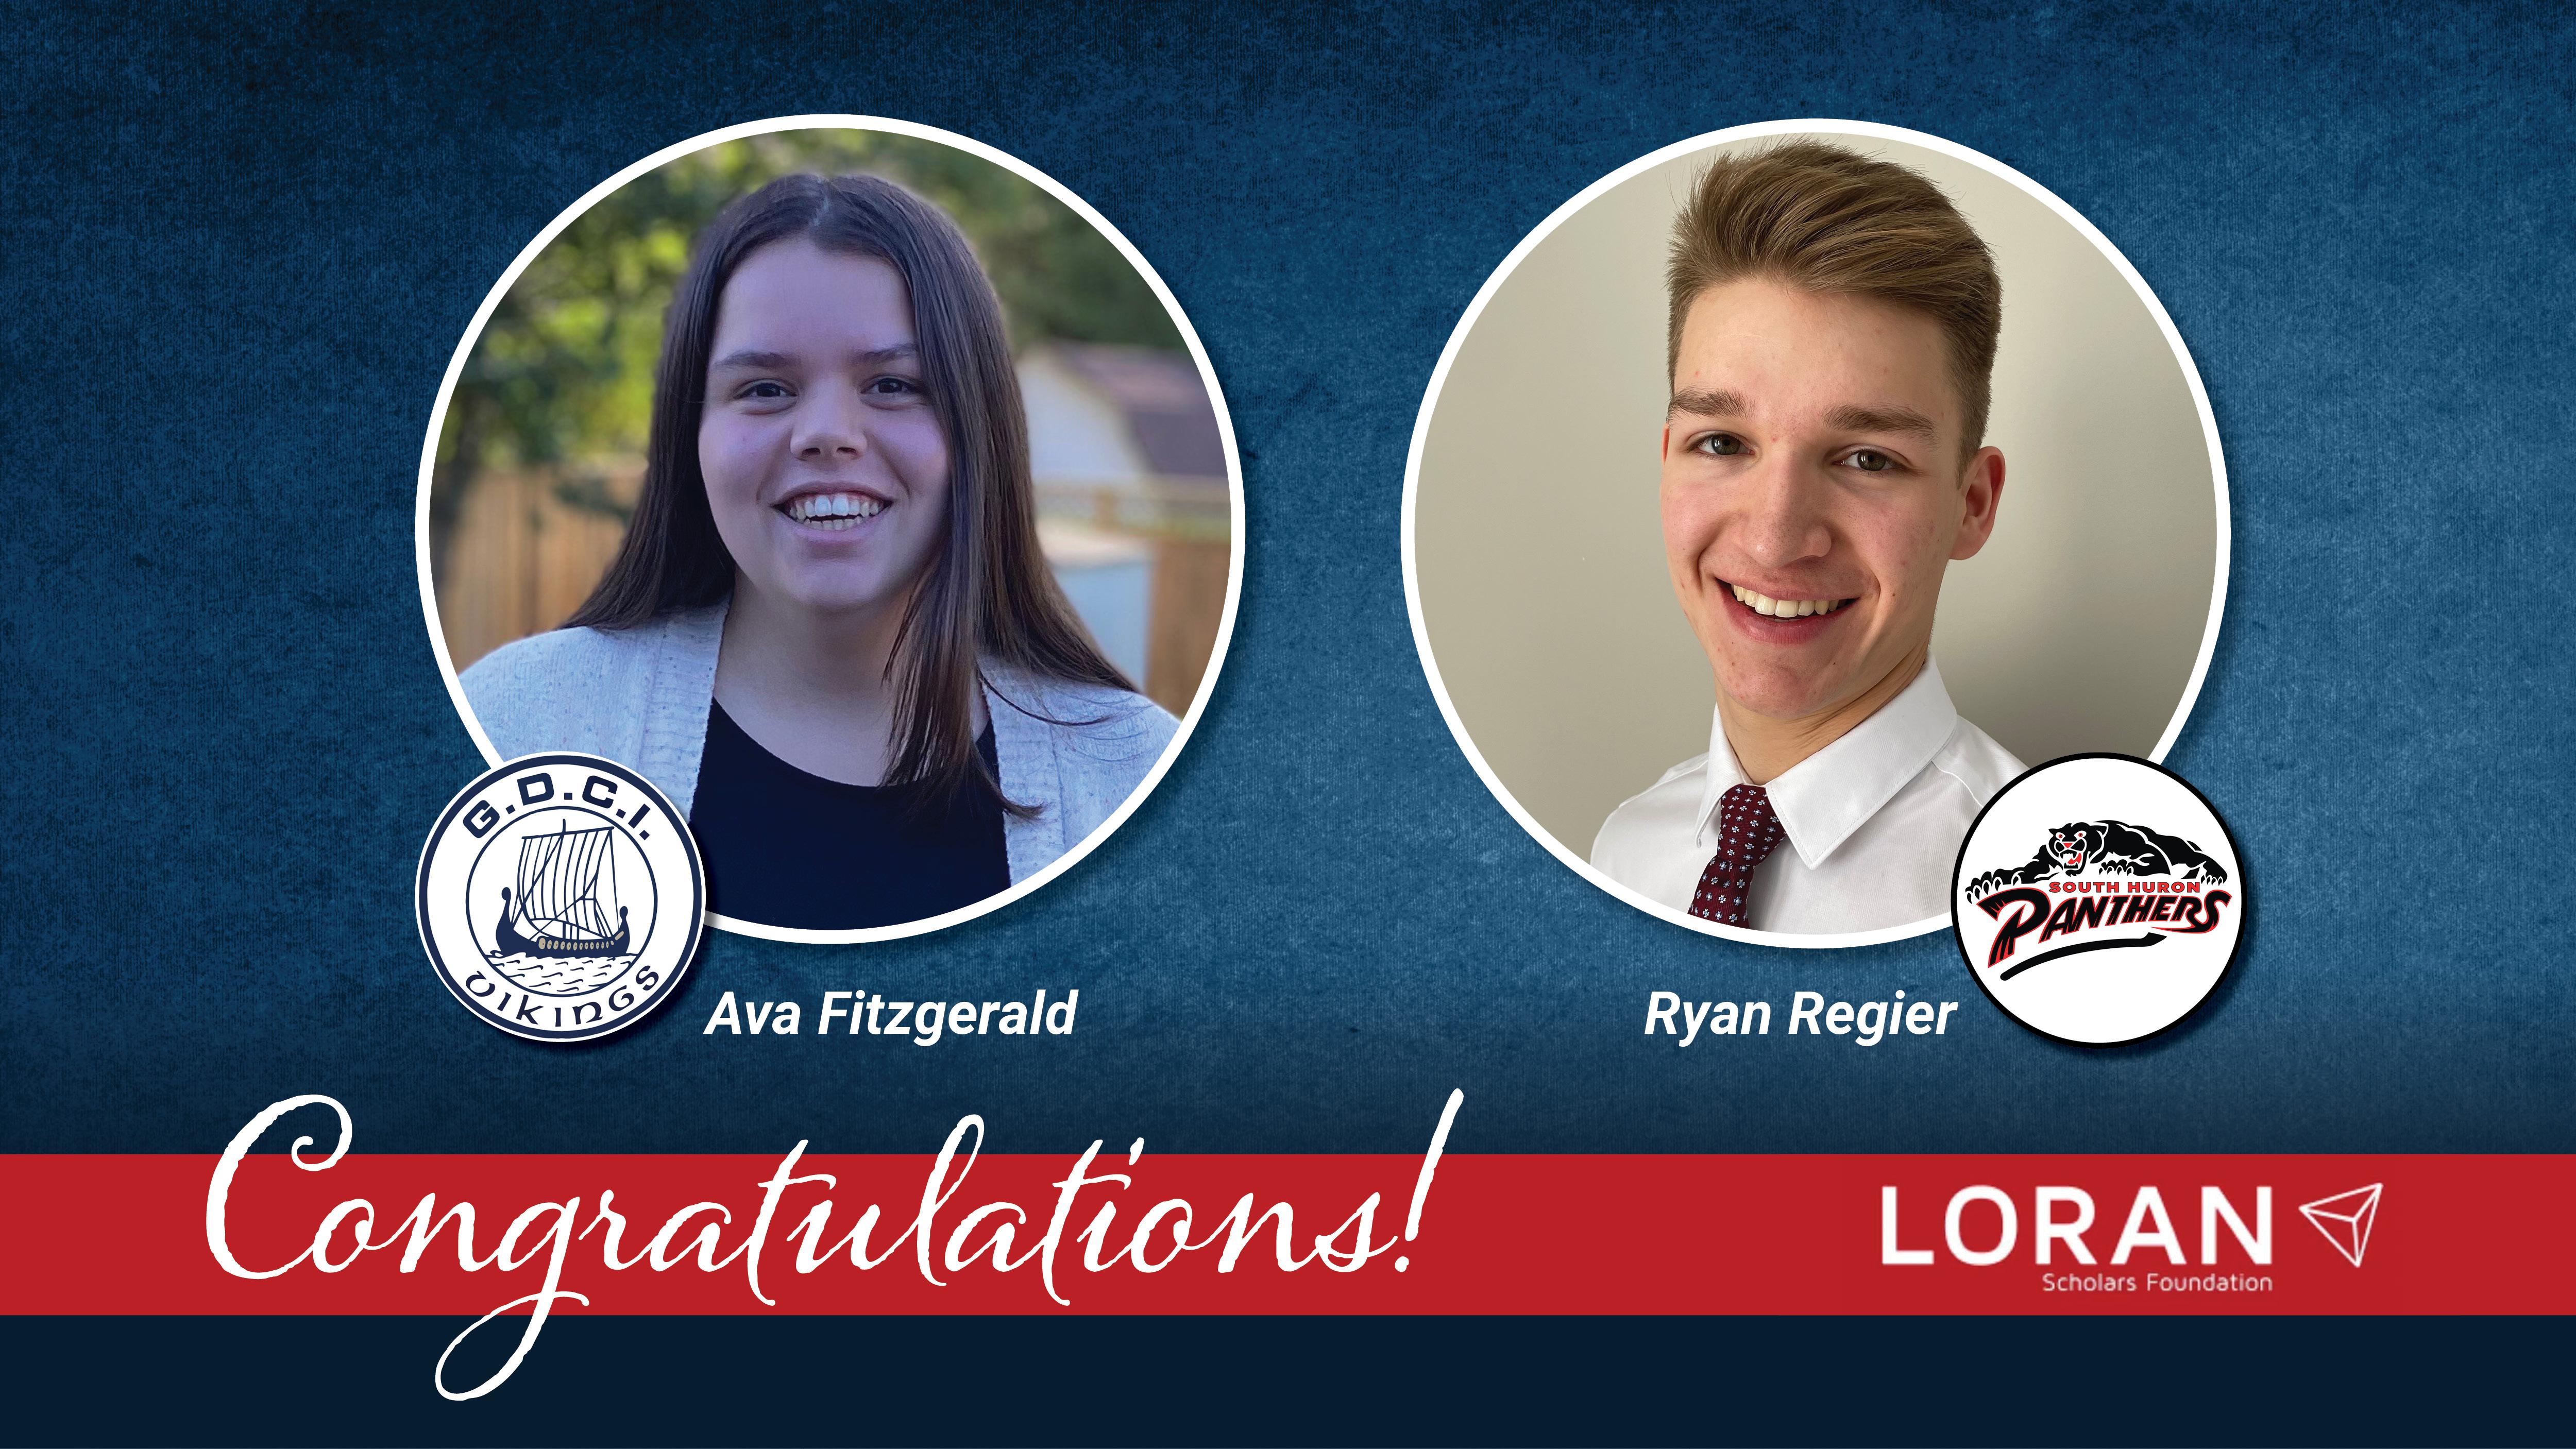 Dark blue textured background with circle-shaped photos of Ava Fitzgerald and Ryan Regier. Ava’s photo has the GDCI logo overlapping the bottom edge and Ryan’s has the SHDHS logo. On a red band in white letters, the text: Congratulations! Loran Scholars Foundation logo